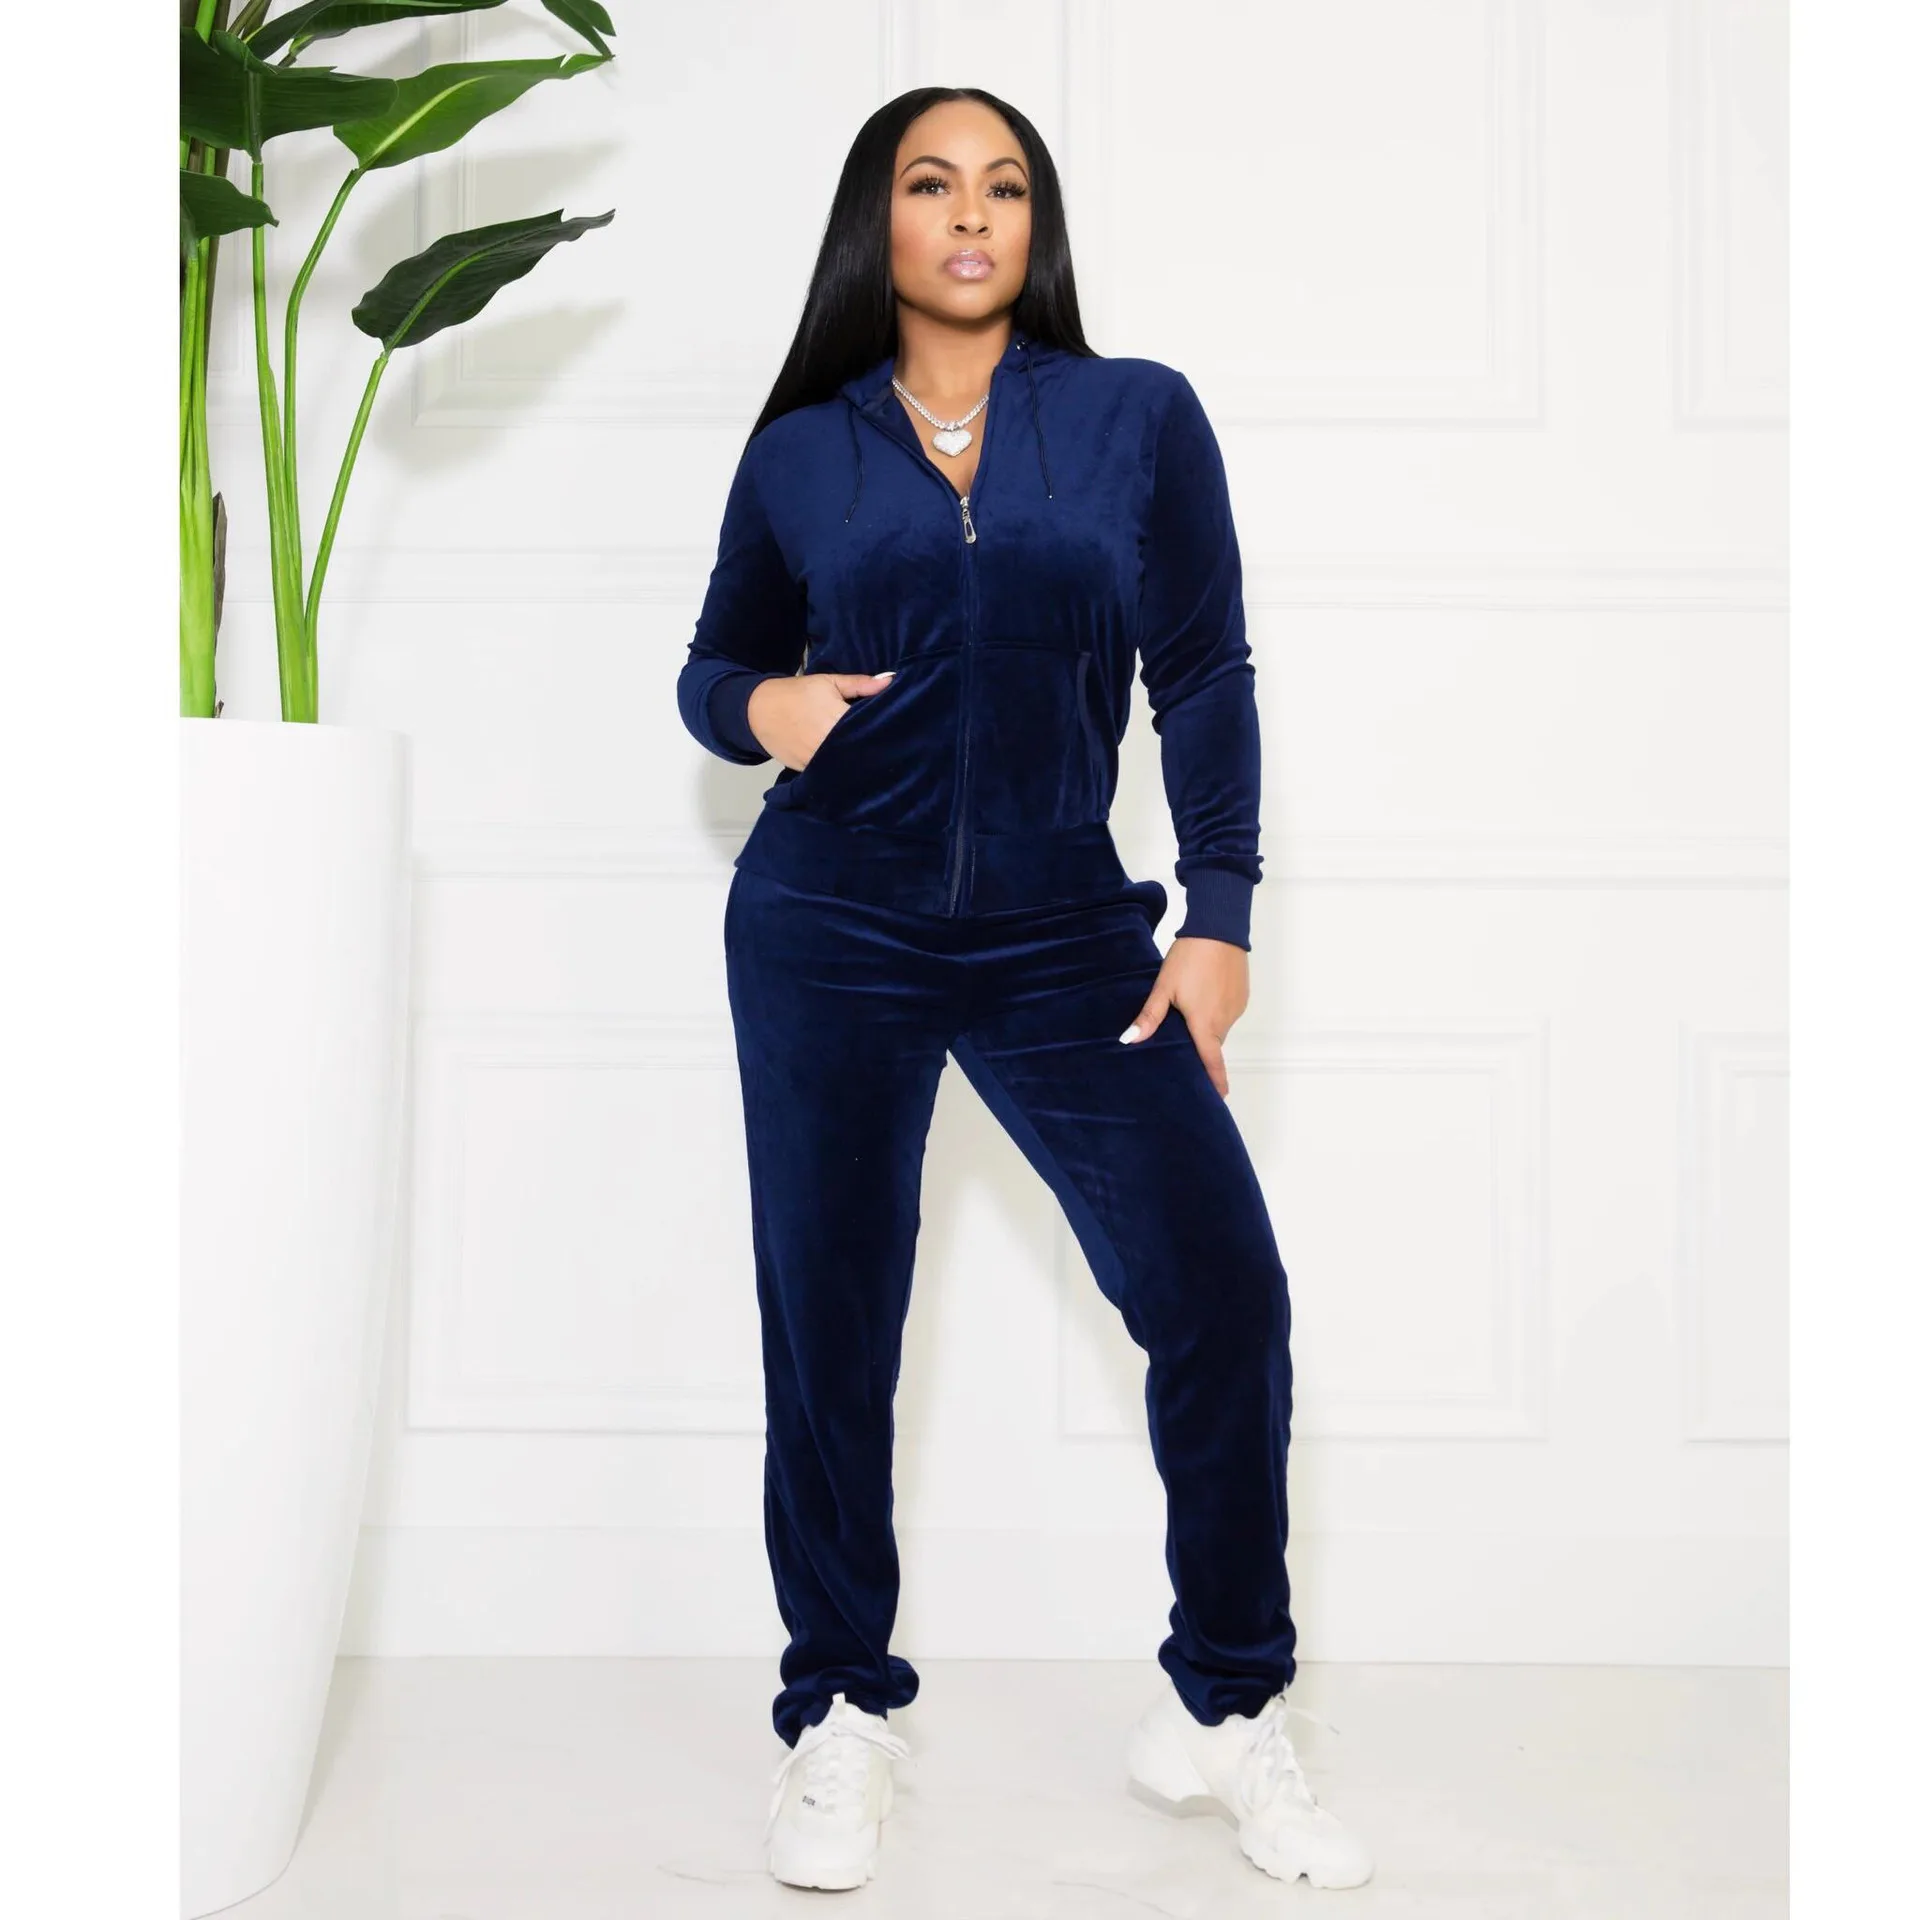 Winter/Fall 2021 Women's Brand Velvet Fabric Tracksuits Velour Suit Women Track Suit Hoodies And Pants Sportswear Outfits yellow pant suit